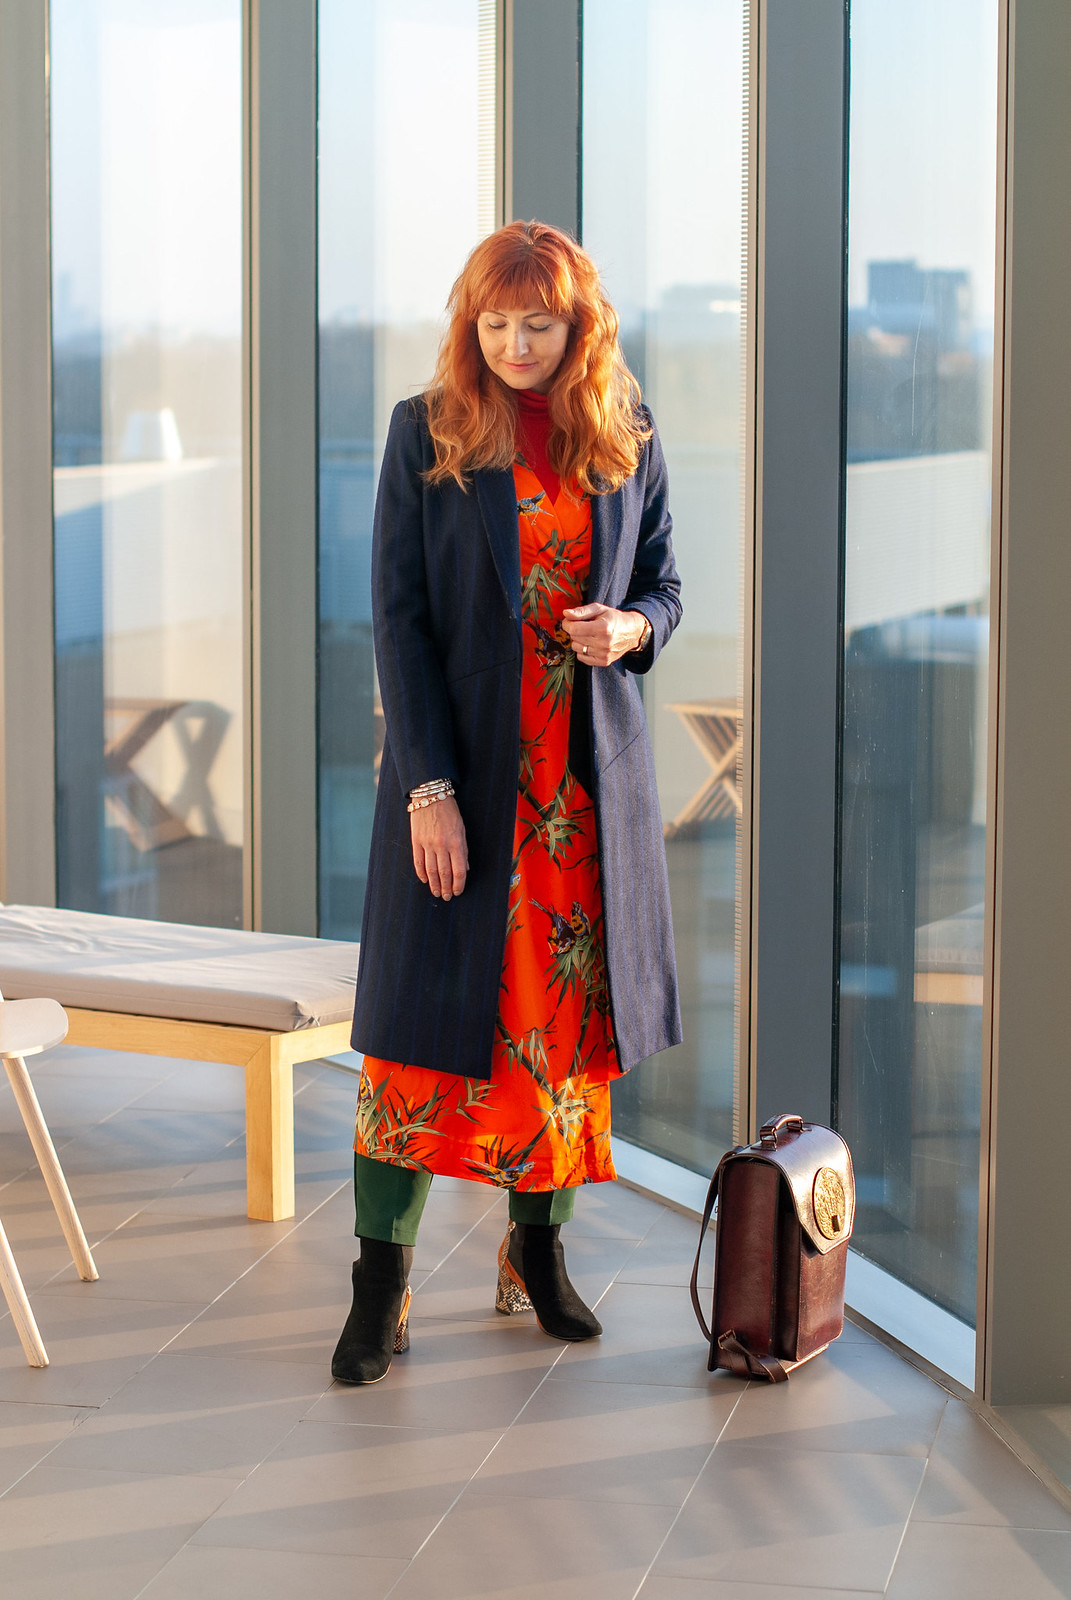 Layering a Midi Dress and Trousers Under a Tailored Coat \ orange floral midi dress \ navy pinstripe tailored coat \ emerald green trousers \ snakeskin and suede ankle boots \ Beara Beara leather backpack | Not Dressed As Lamb, over 40 style